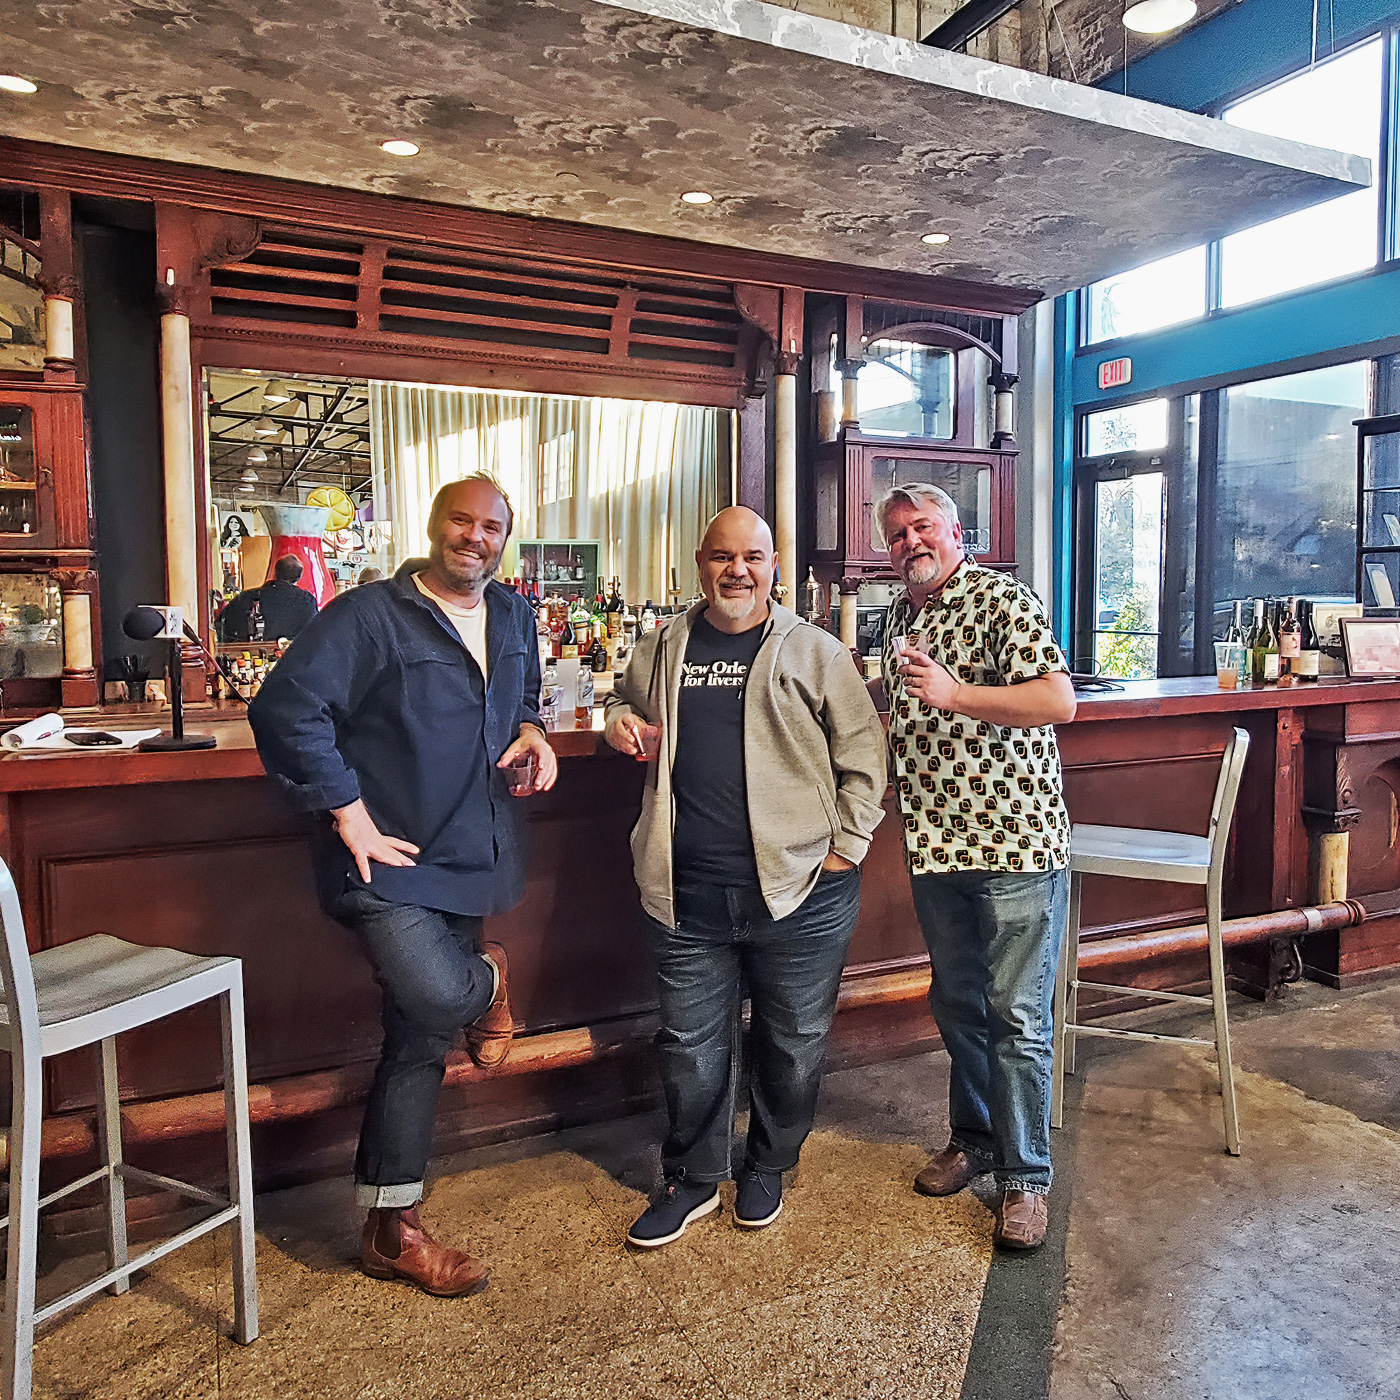 The NOLADrinks Show with Bryan Dias - Year of American Whiskey - 2022Ep2 – Brent Rosen of the Southern Food and Beverage Museum, Tracy Napolitano of New Orleans Bourbon Festival, and Bryan Dias of The NOLADrinks Show.